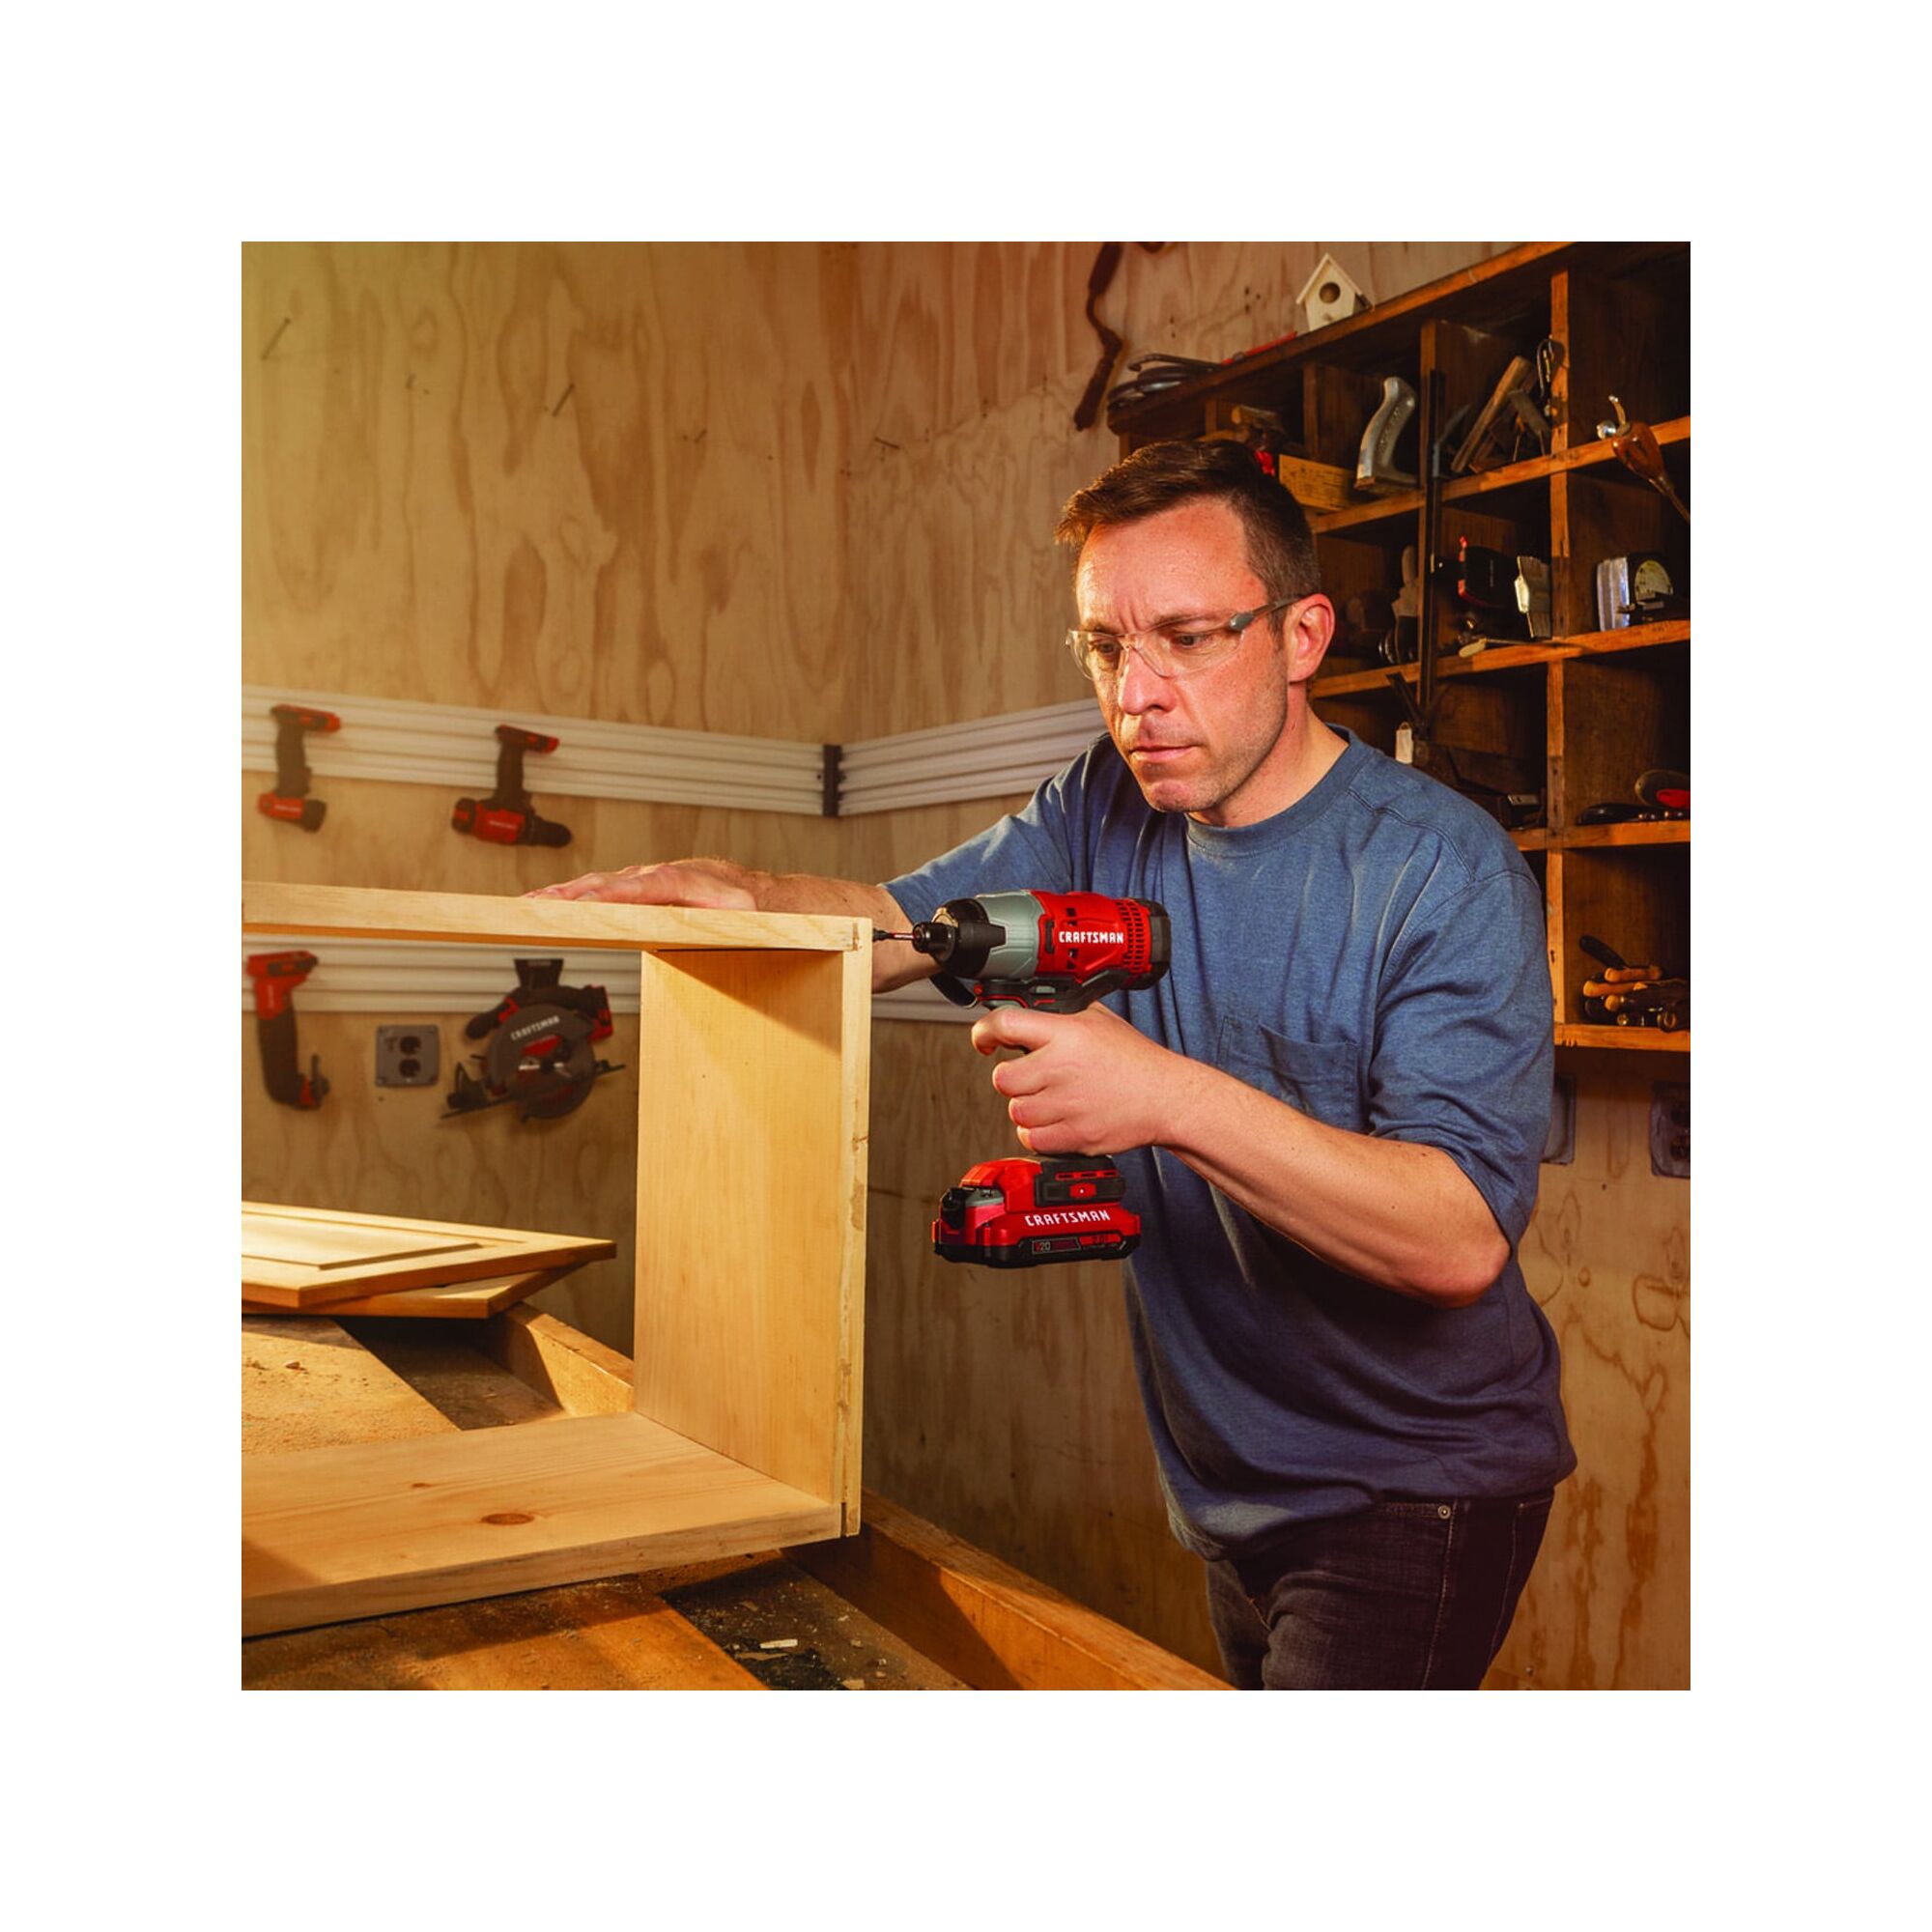 View of CRAFTSMAN Combo Kits: Power Tools  being used by consumer